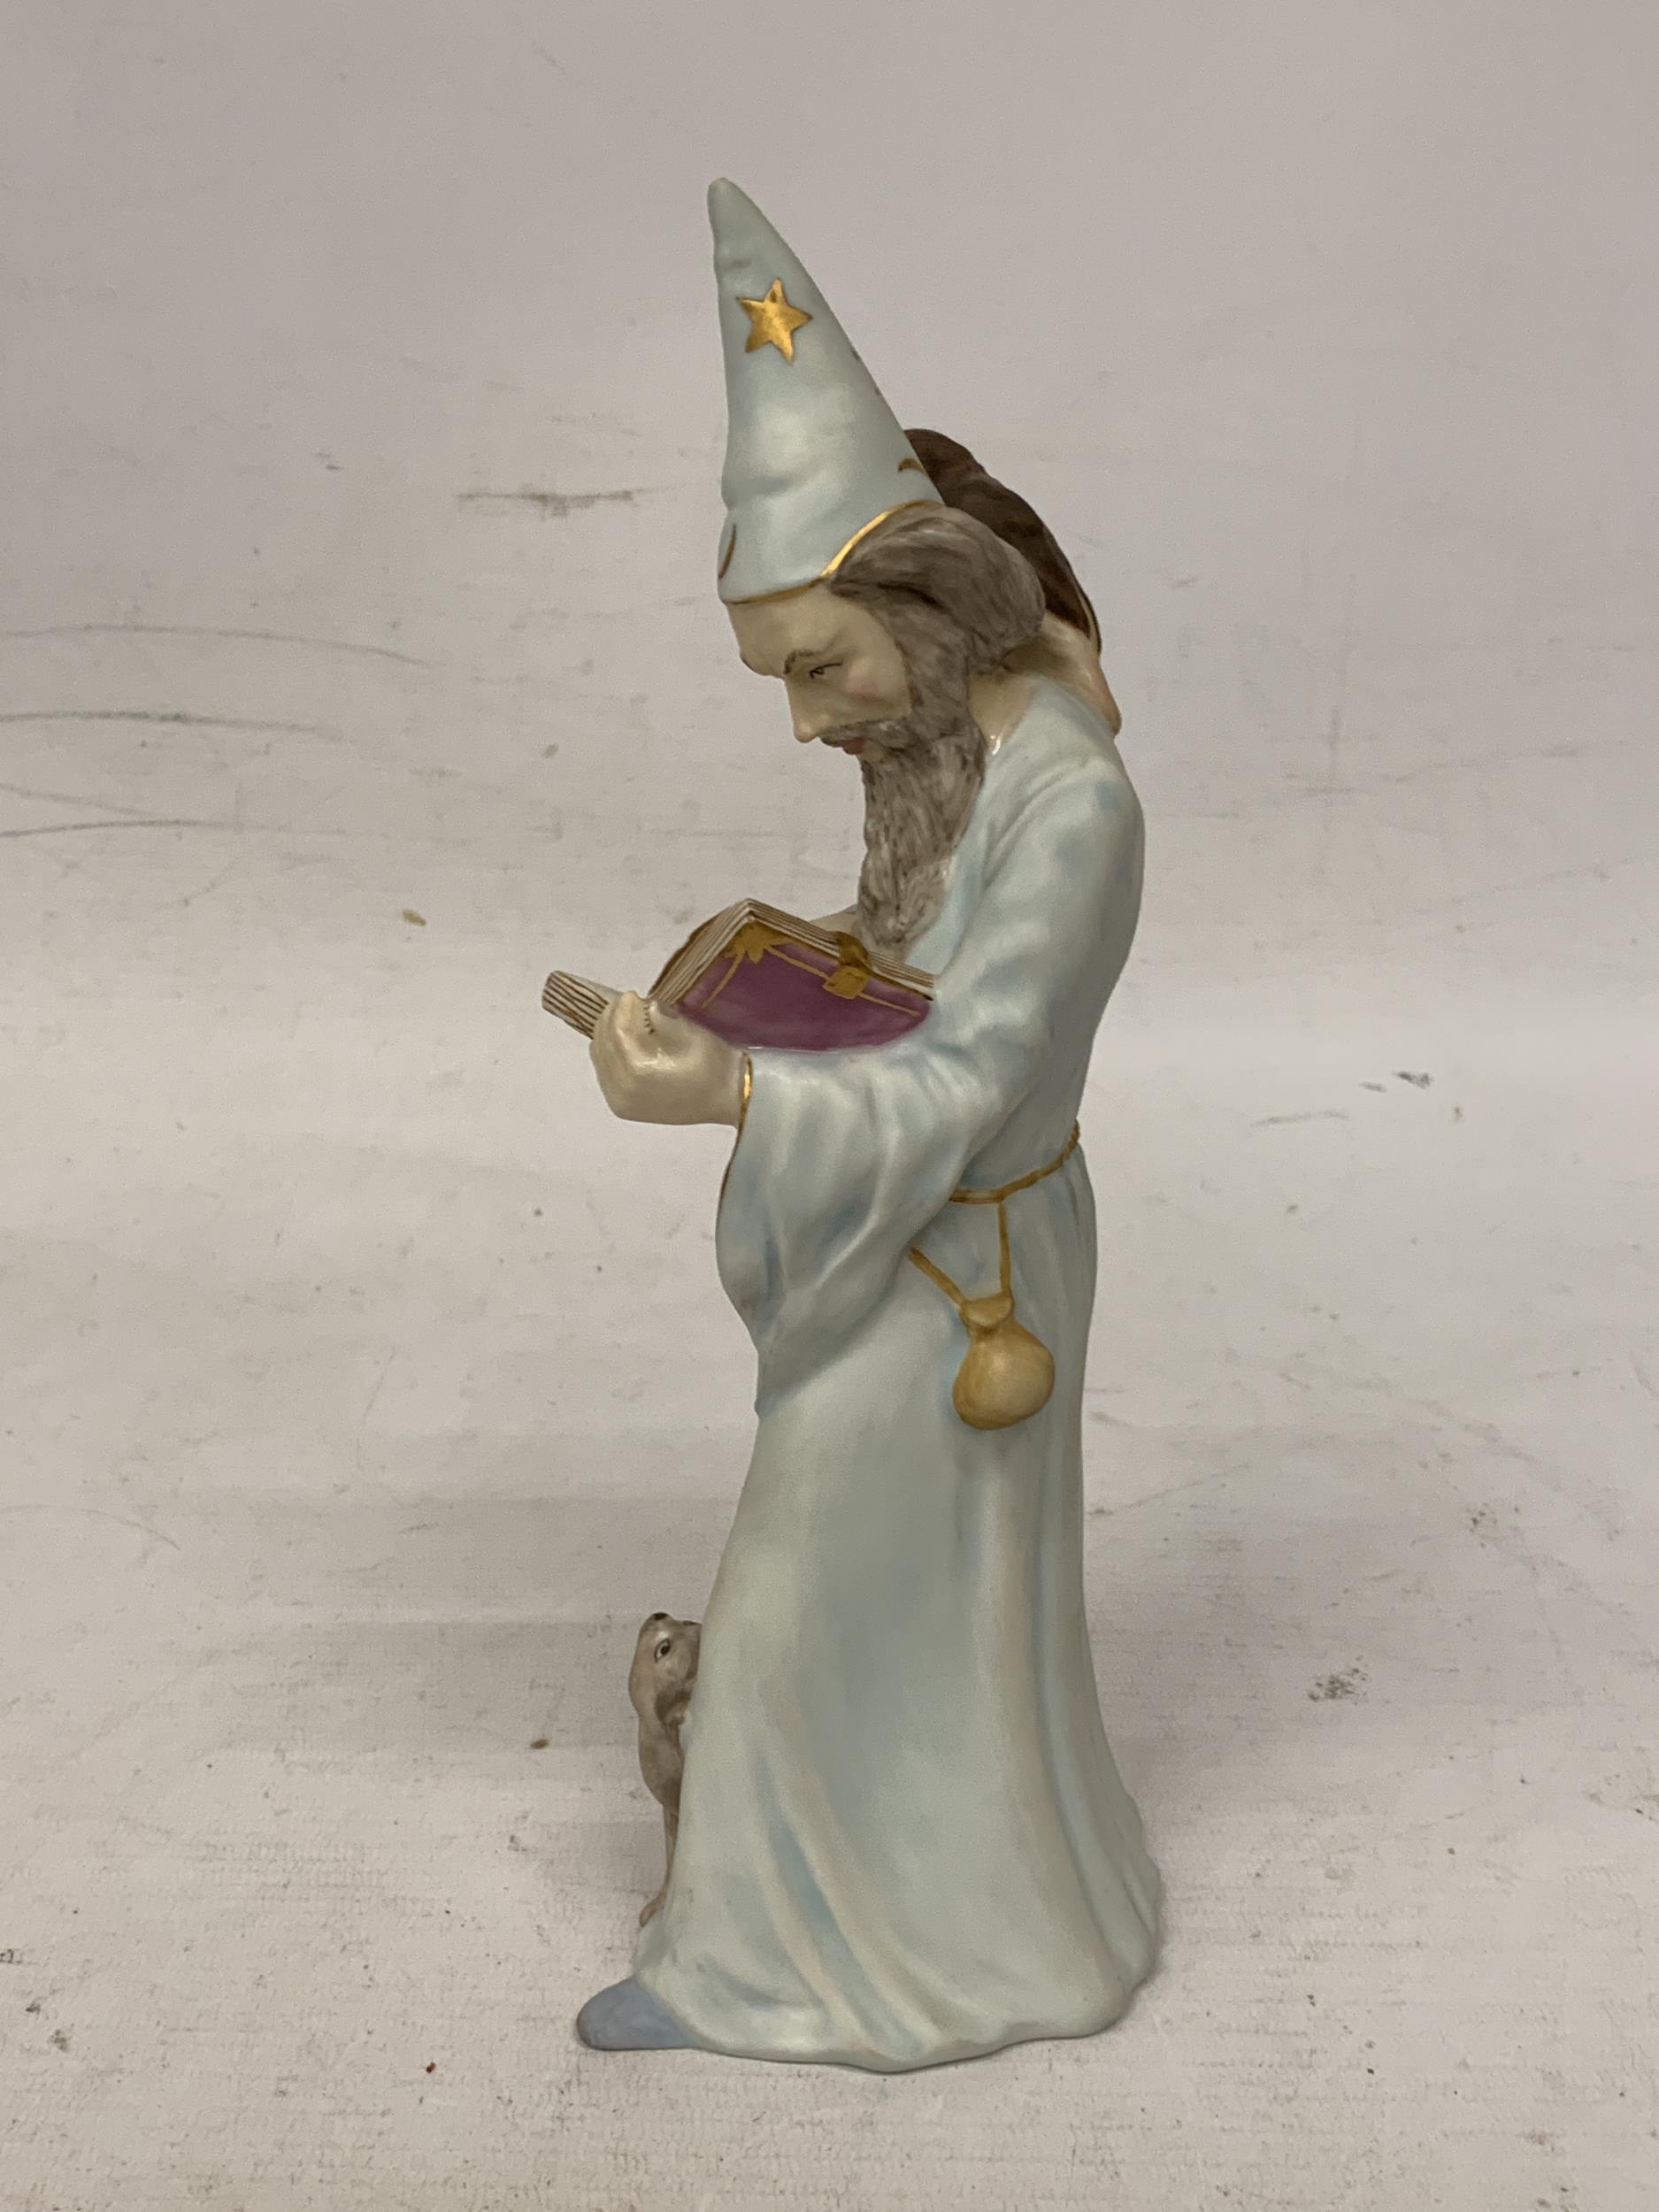 A ROYAL DOULTON FIGURE "THE WIZARD" HN 4069 LIMITED EDITION SIGNED IN GOLD - Image 4 of 5